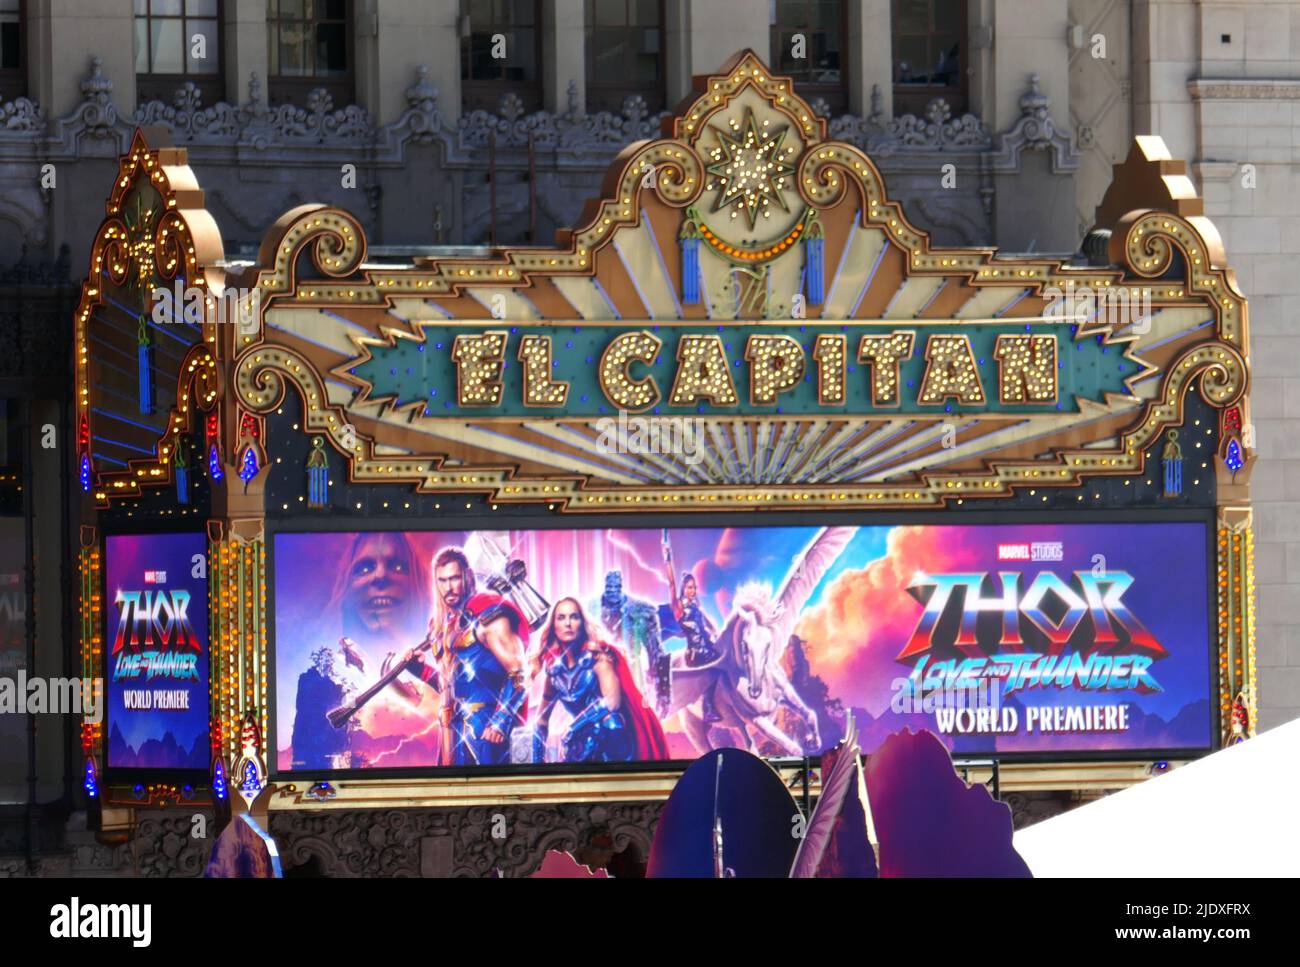 Hollywood, California, USA 23rd June 2022 Marvel Studios World Premiere of Thor: Love And Thunder at El Capitan Theatre and TCL Chinese Theatre on June 23, 2022 in Hollywood, California, USA. Photo by Barry King/Alamy Live News Stock Photo